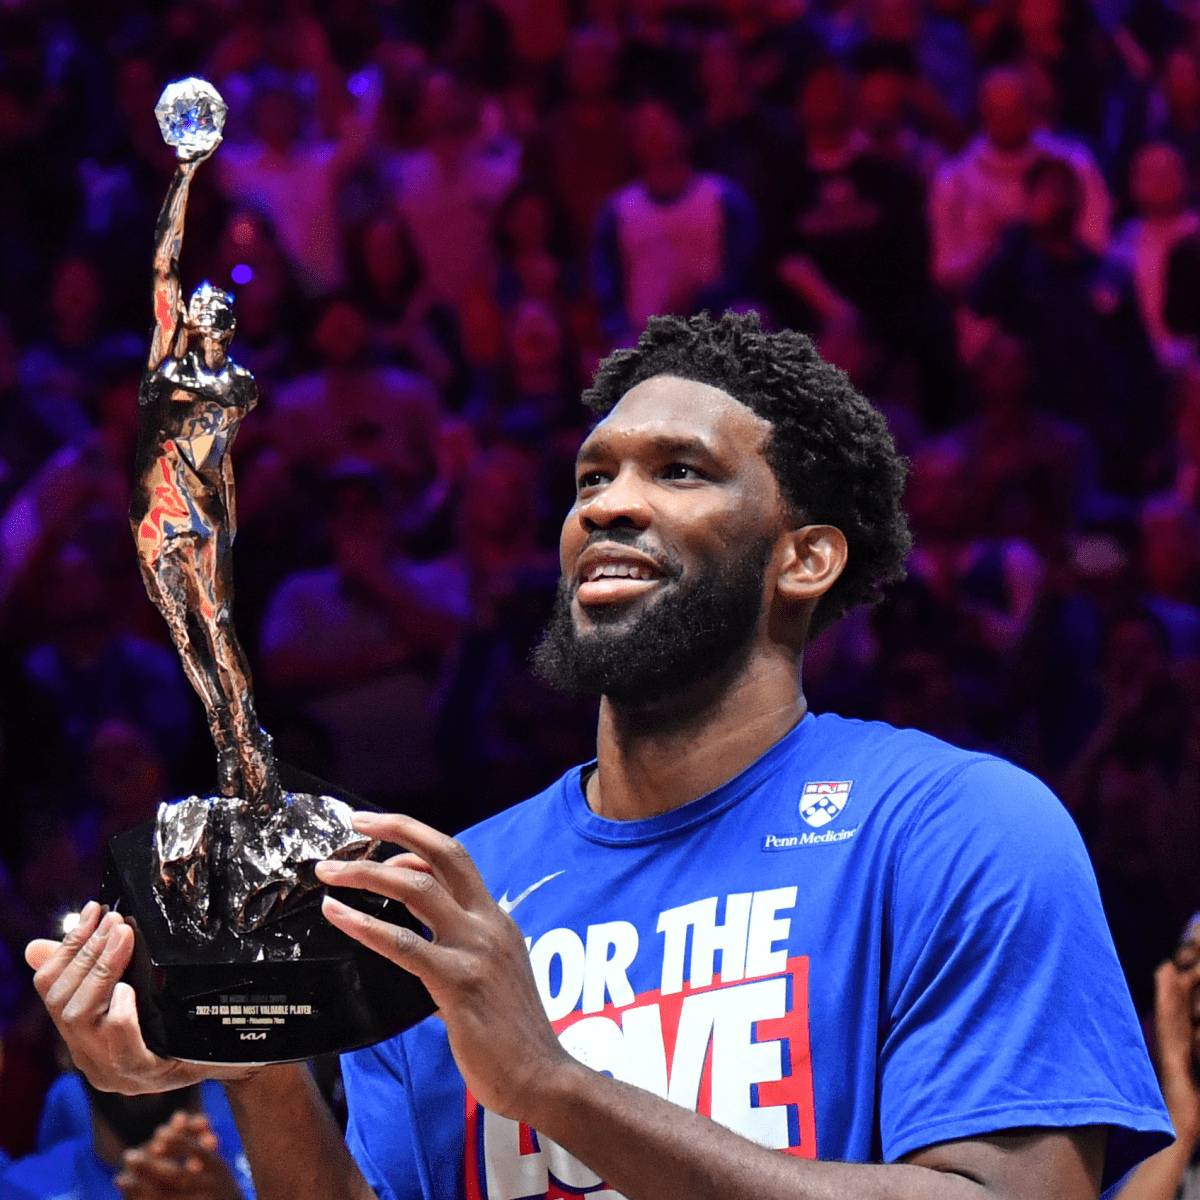 The Hilarious and Beautiful Absurdity of the NBA MVP Award